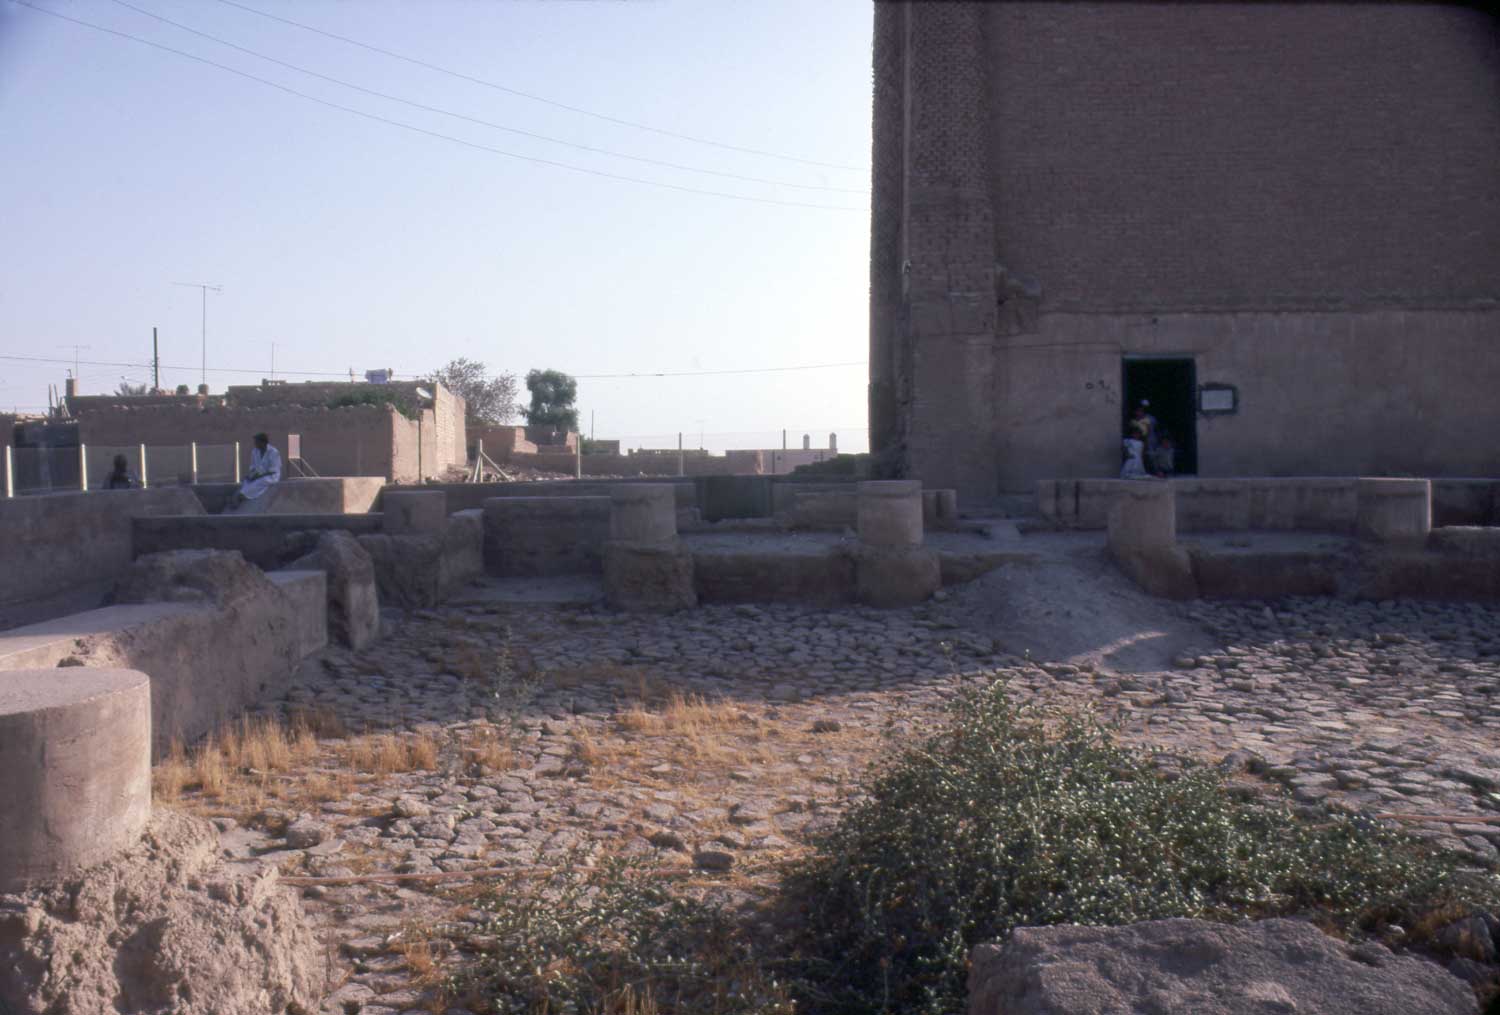 View of the remains of an adjacent mosque